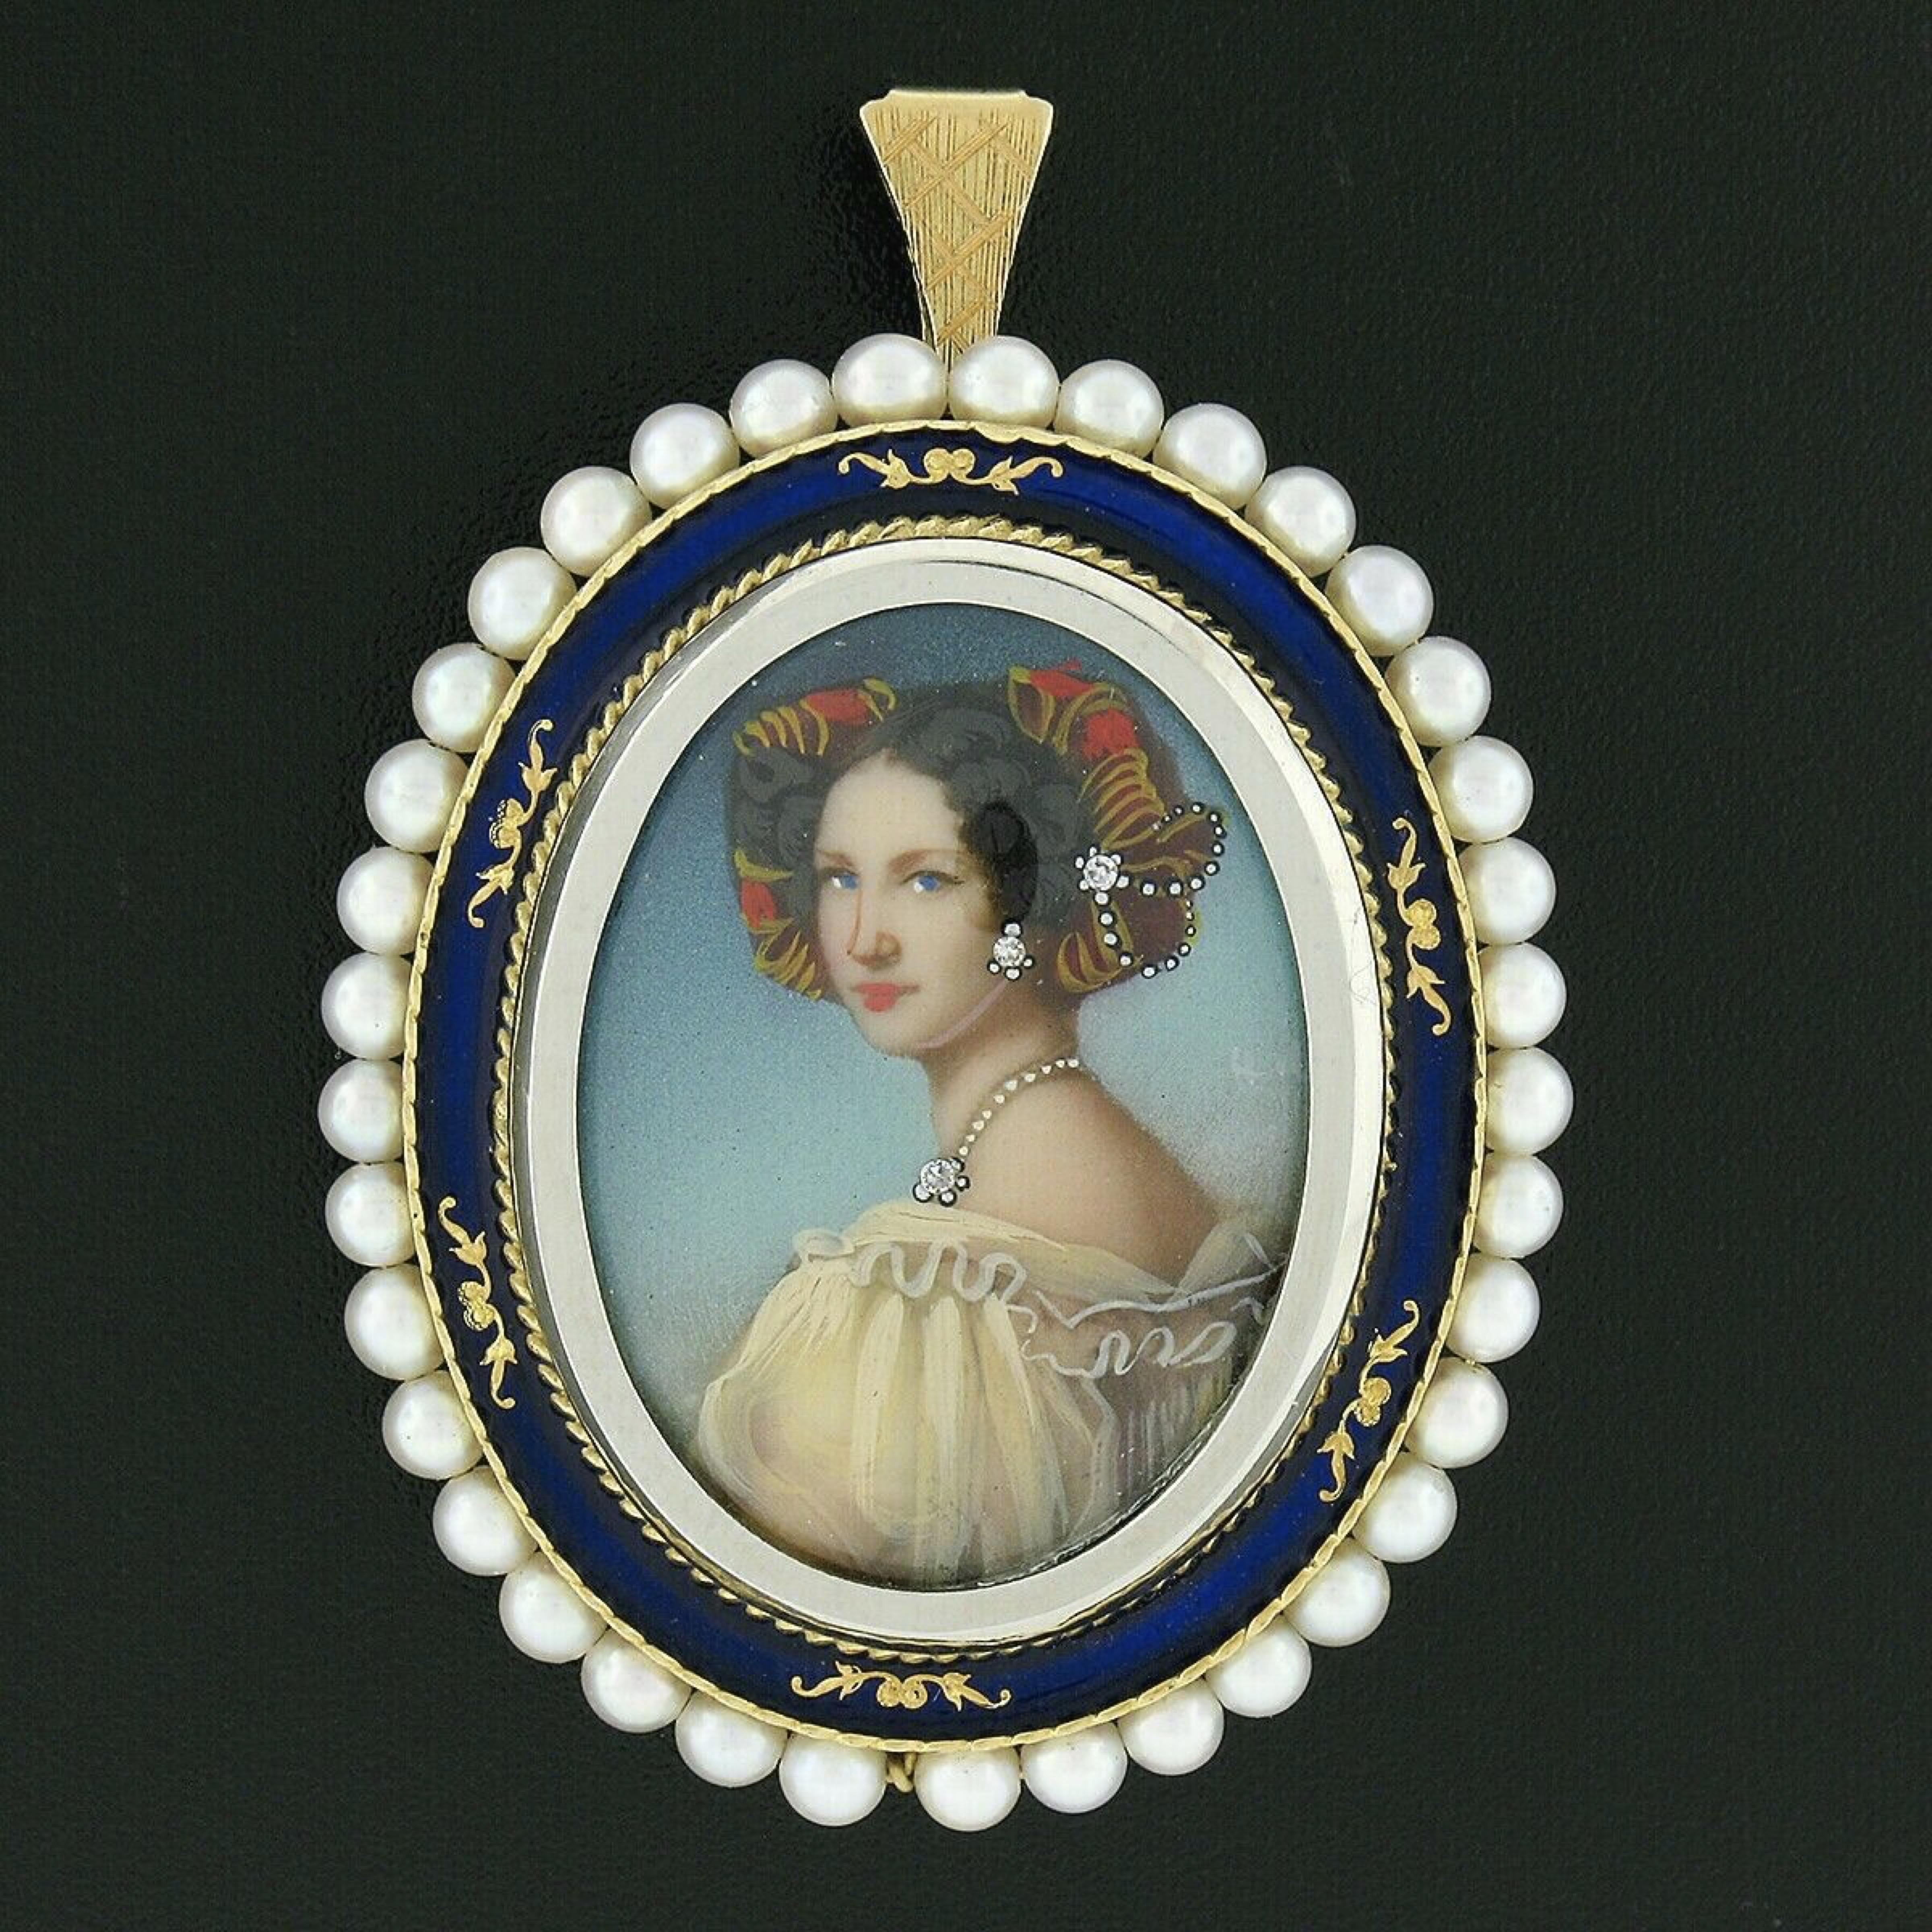 Here we have a magnificent vintage pendant or brooch that was crafted from solid 18k yellow and white gold featuring an oval-shaped hand painted portrait of a woman topped with glass. The portrait is neatly bezel set in white gold showing absolutely